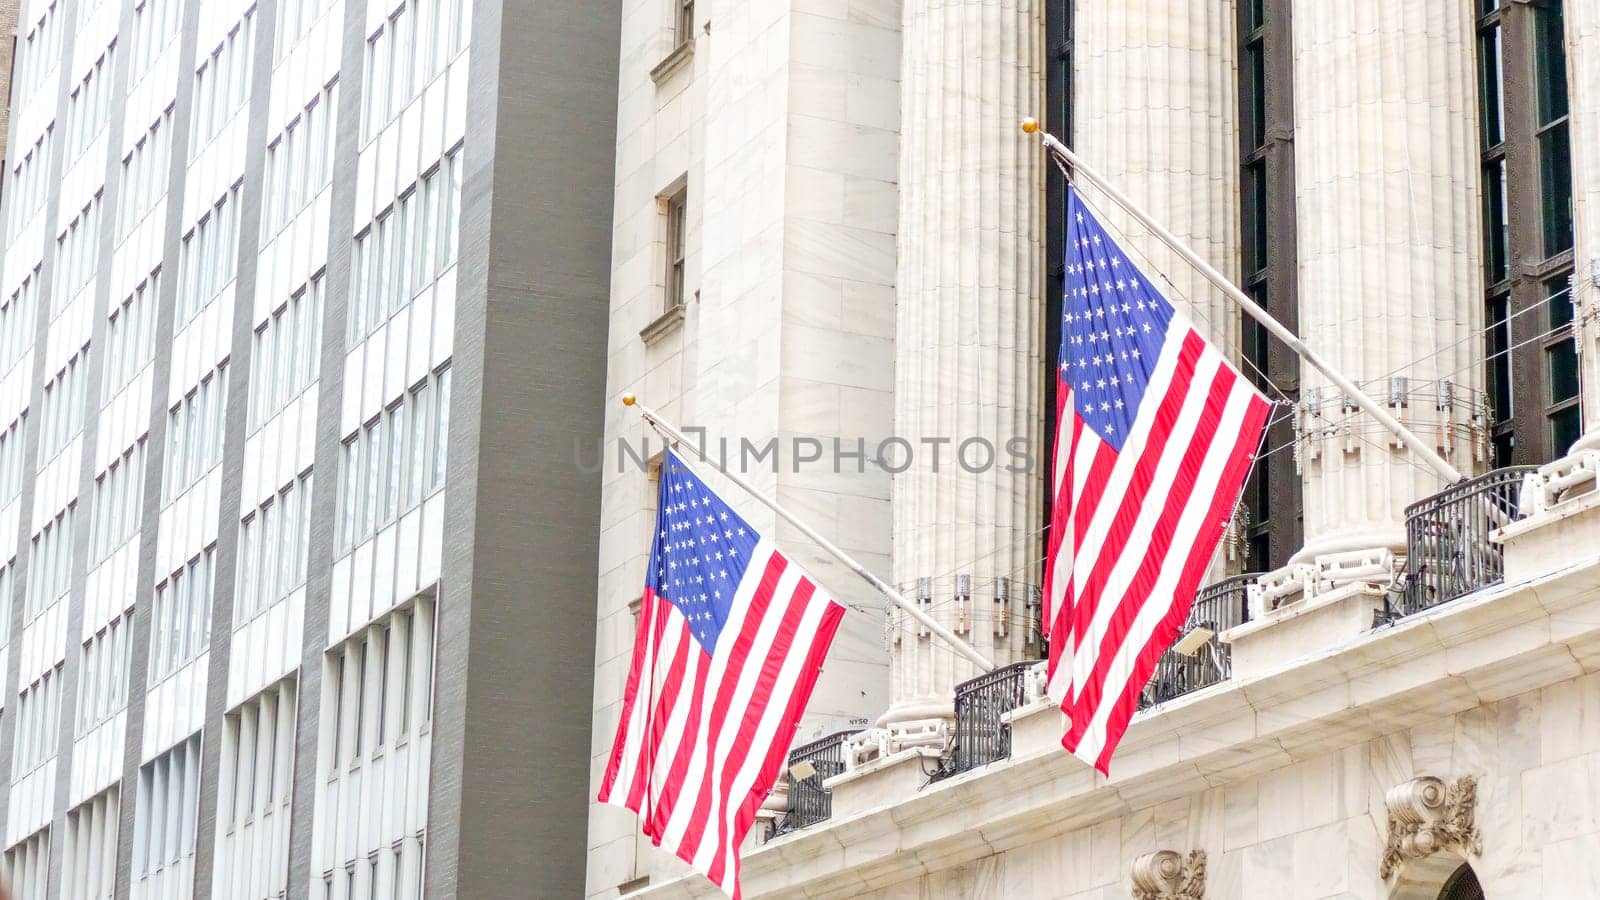 American flags on the main facade of the New York Stock Exchange - NYSE Building in the Financial District of Lower Manhattan in New York City is seen on July 4th, 2023 by JuliaDorian